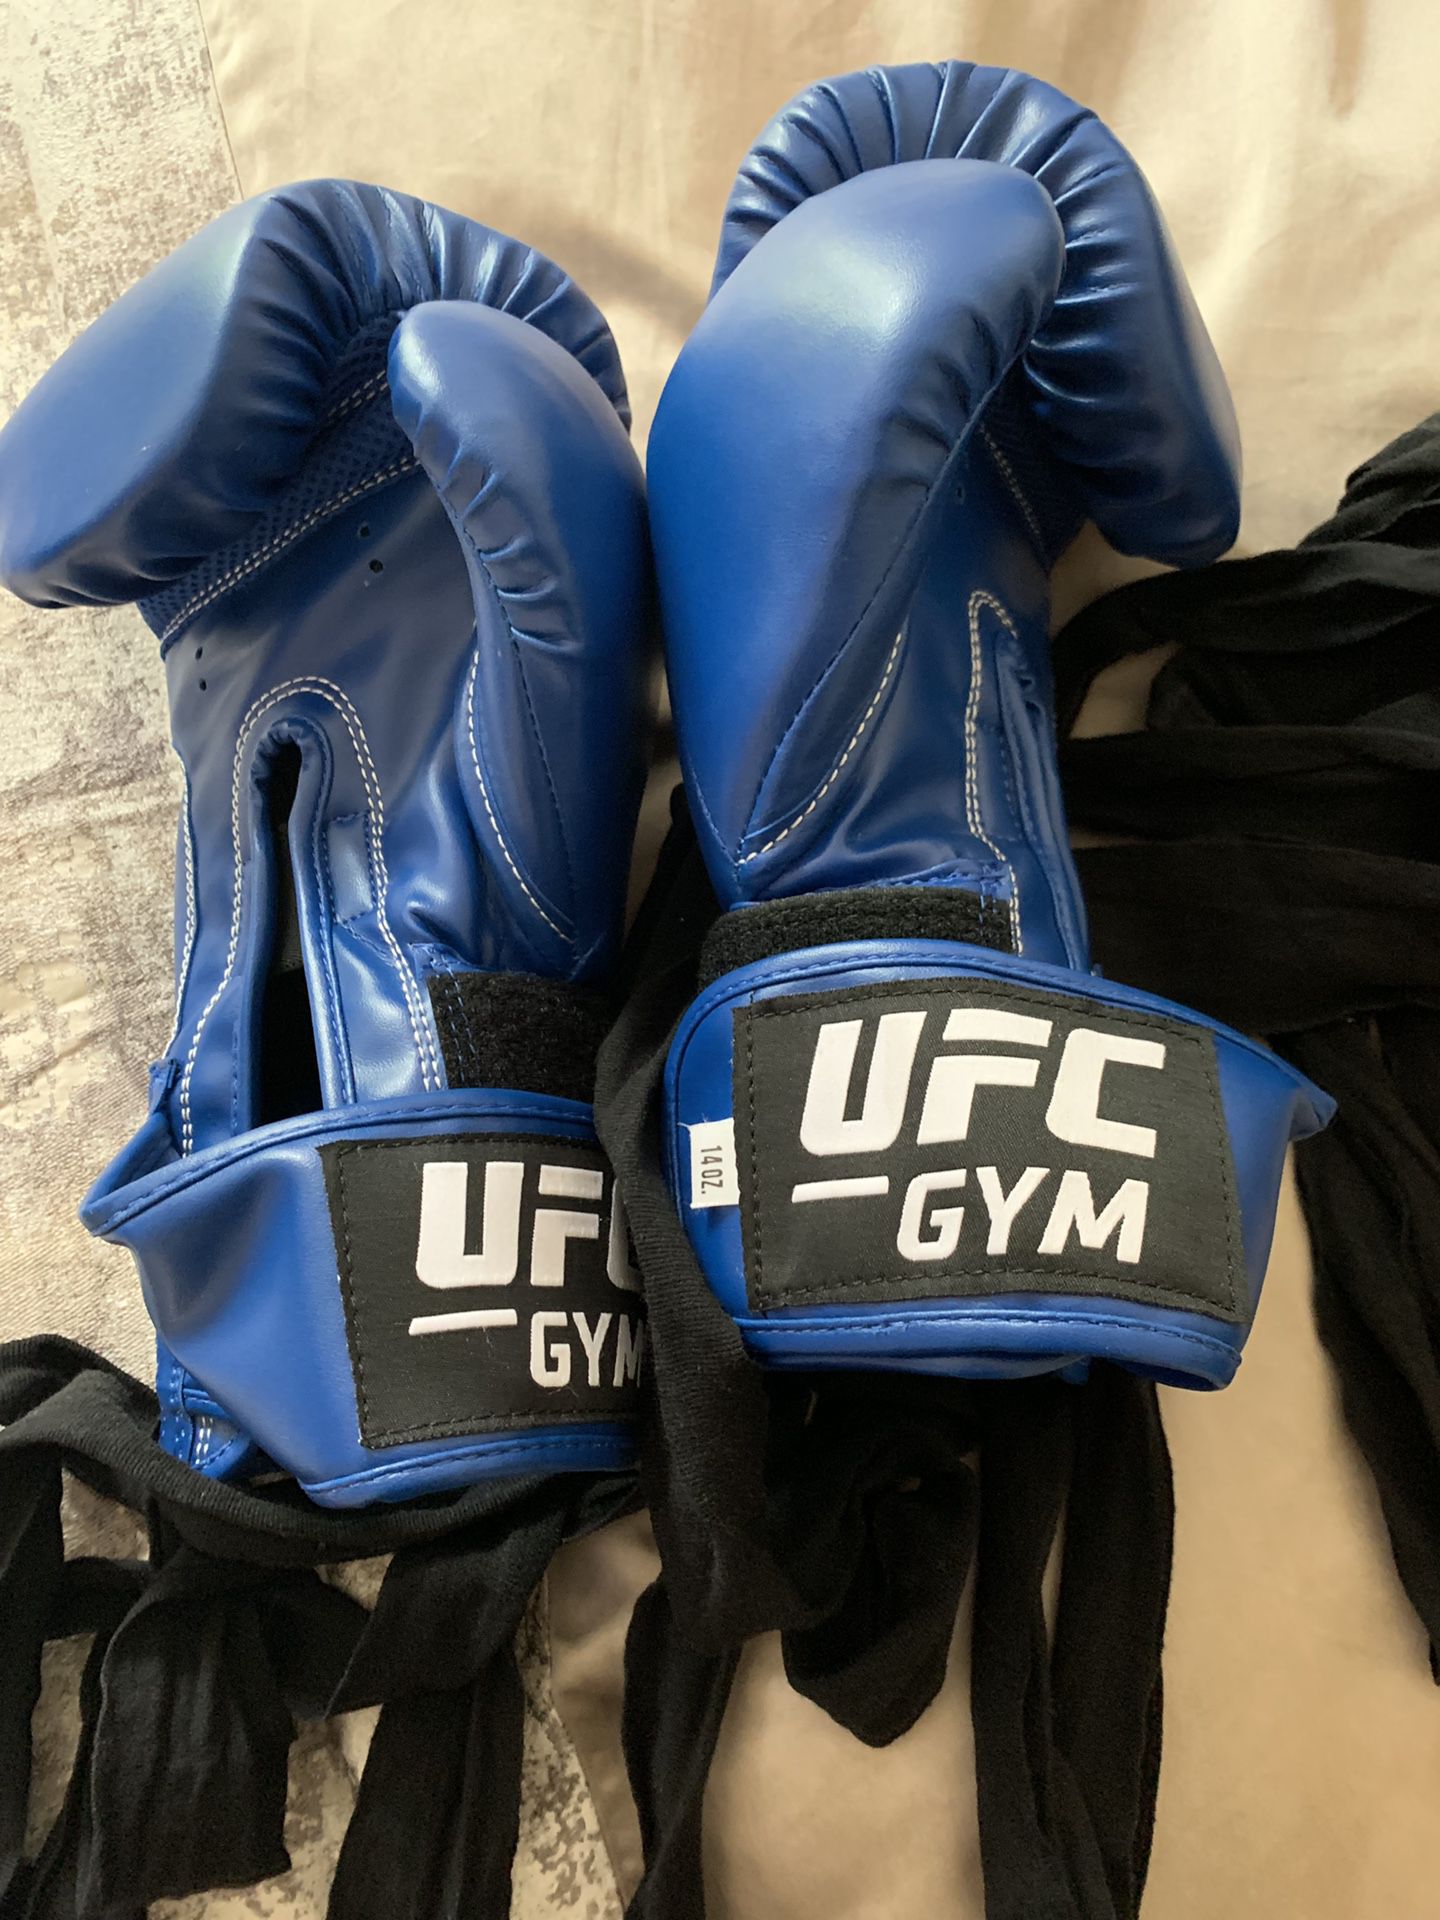 New Boxing Gloves